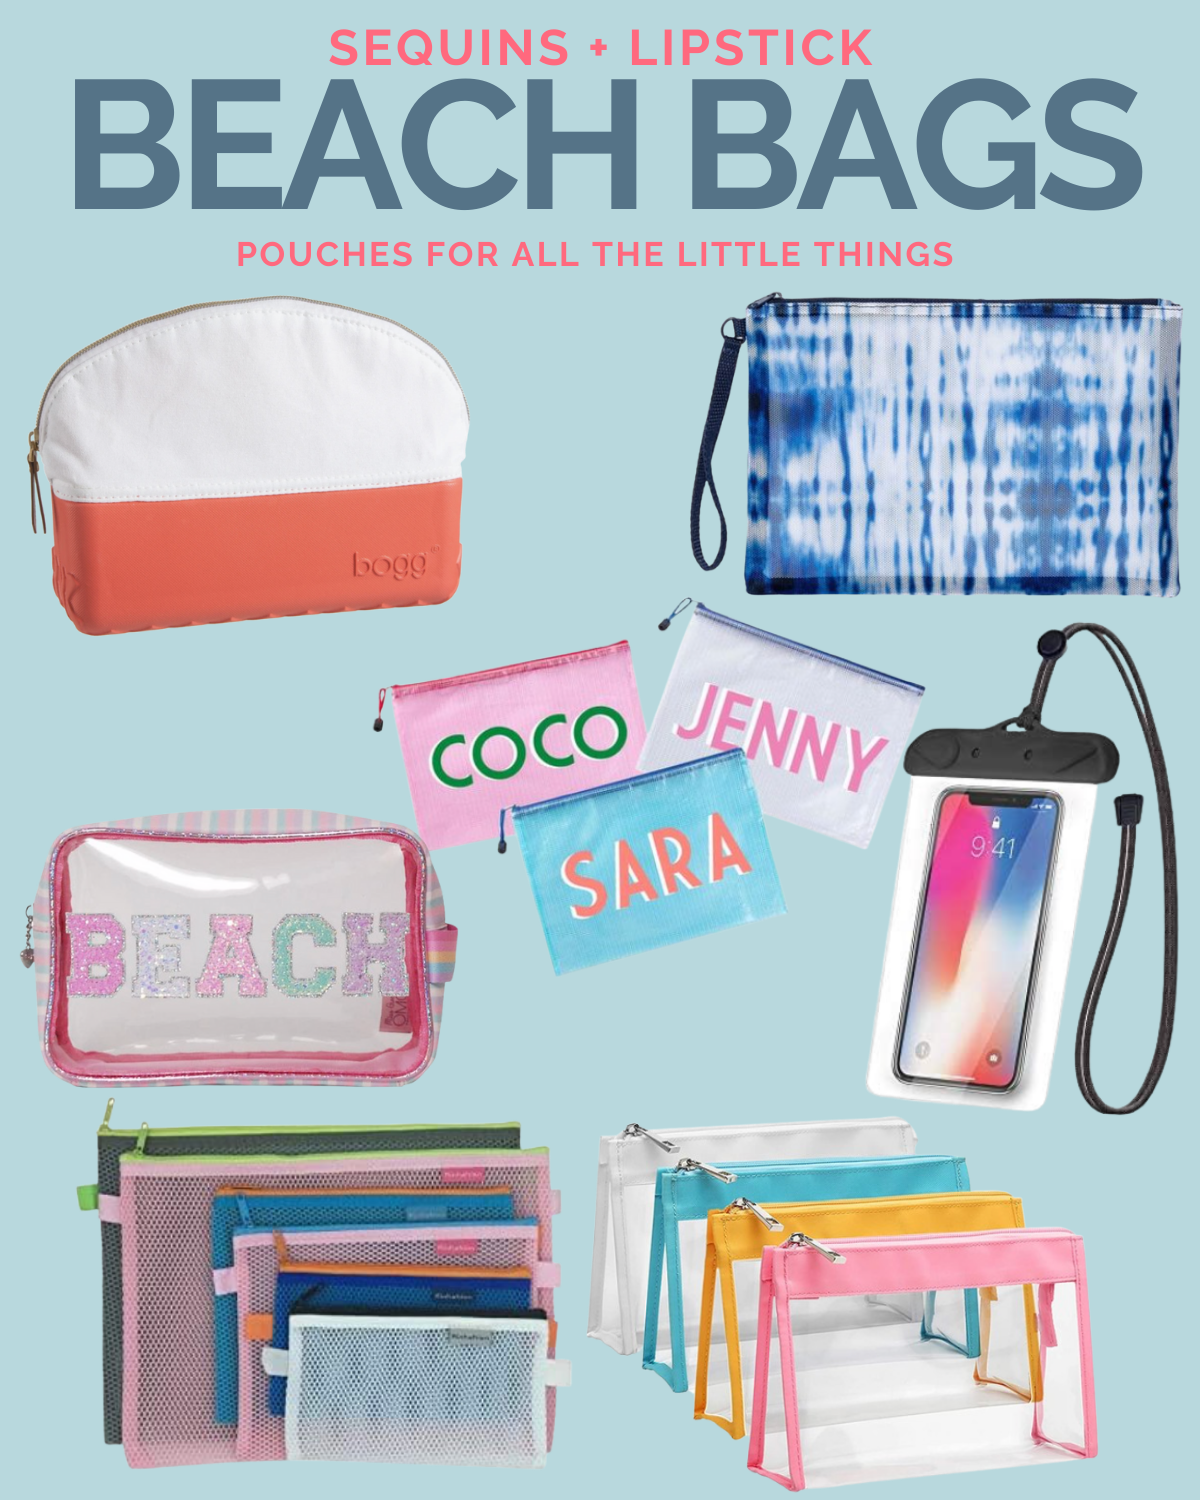 16 Bags to Take to the Beach This Weekend, Starting Under $100